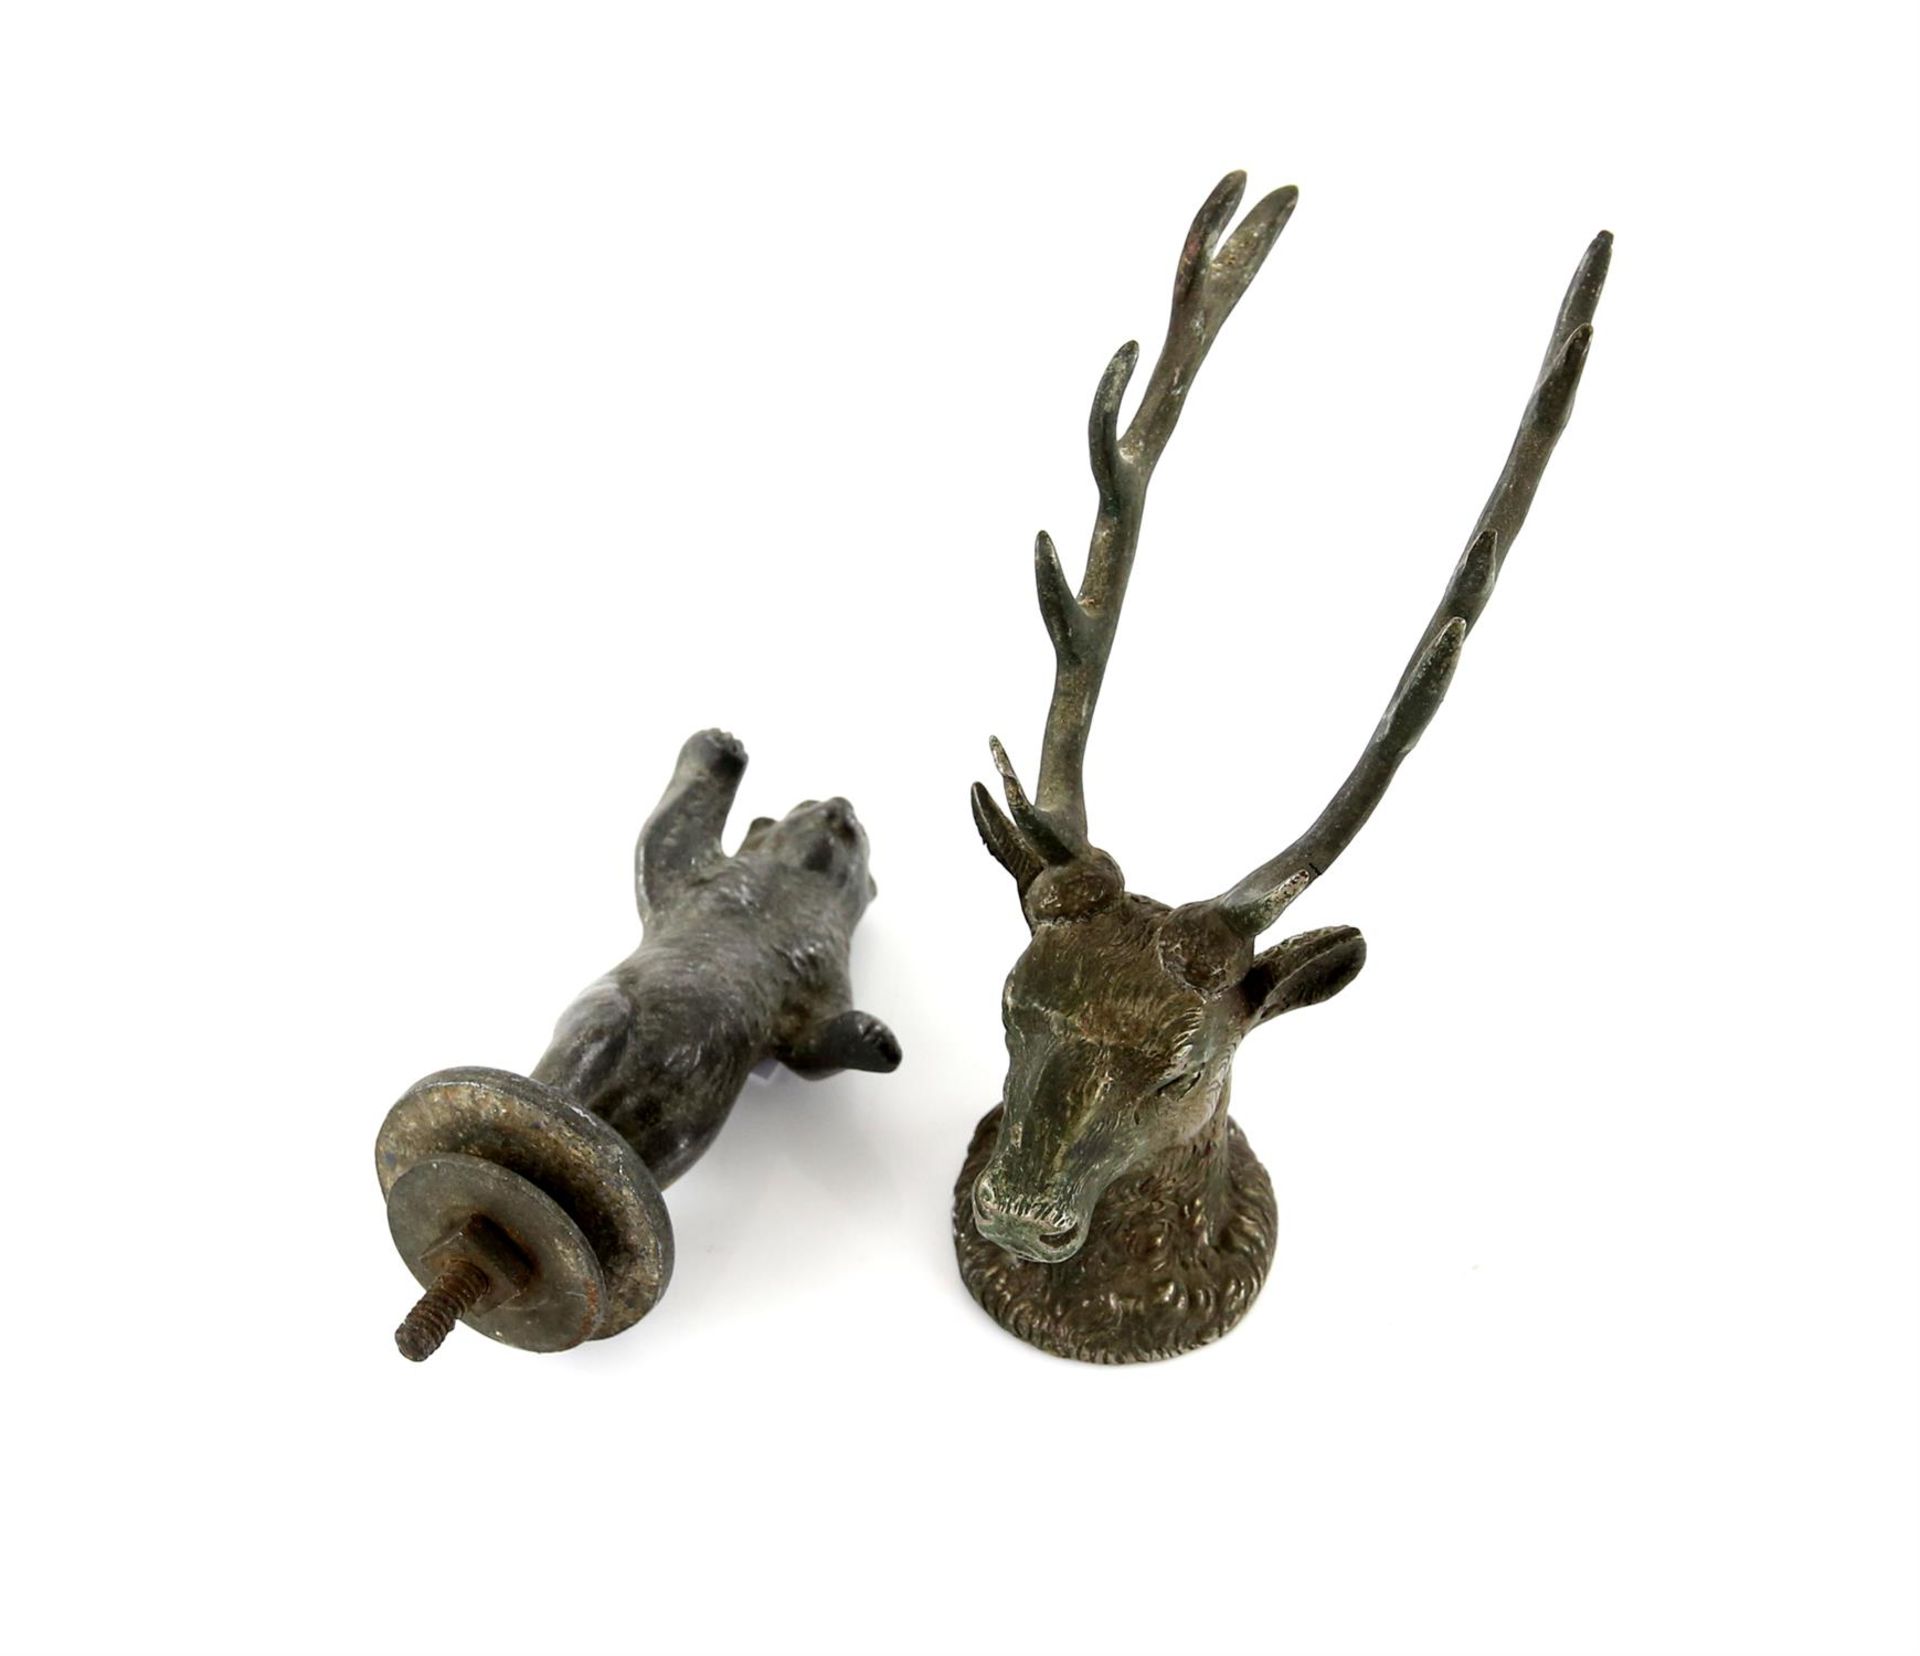 Two vintage car mascots - includes angular stag mascot (12cm in height) & a grizzly bear mascot